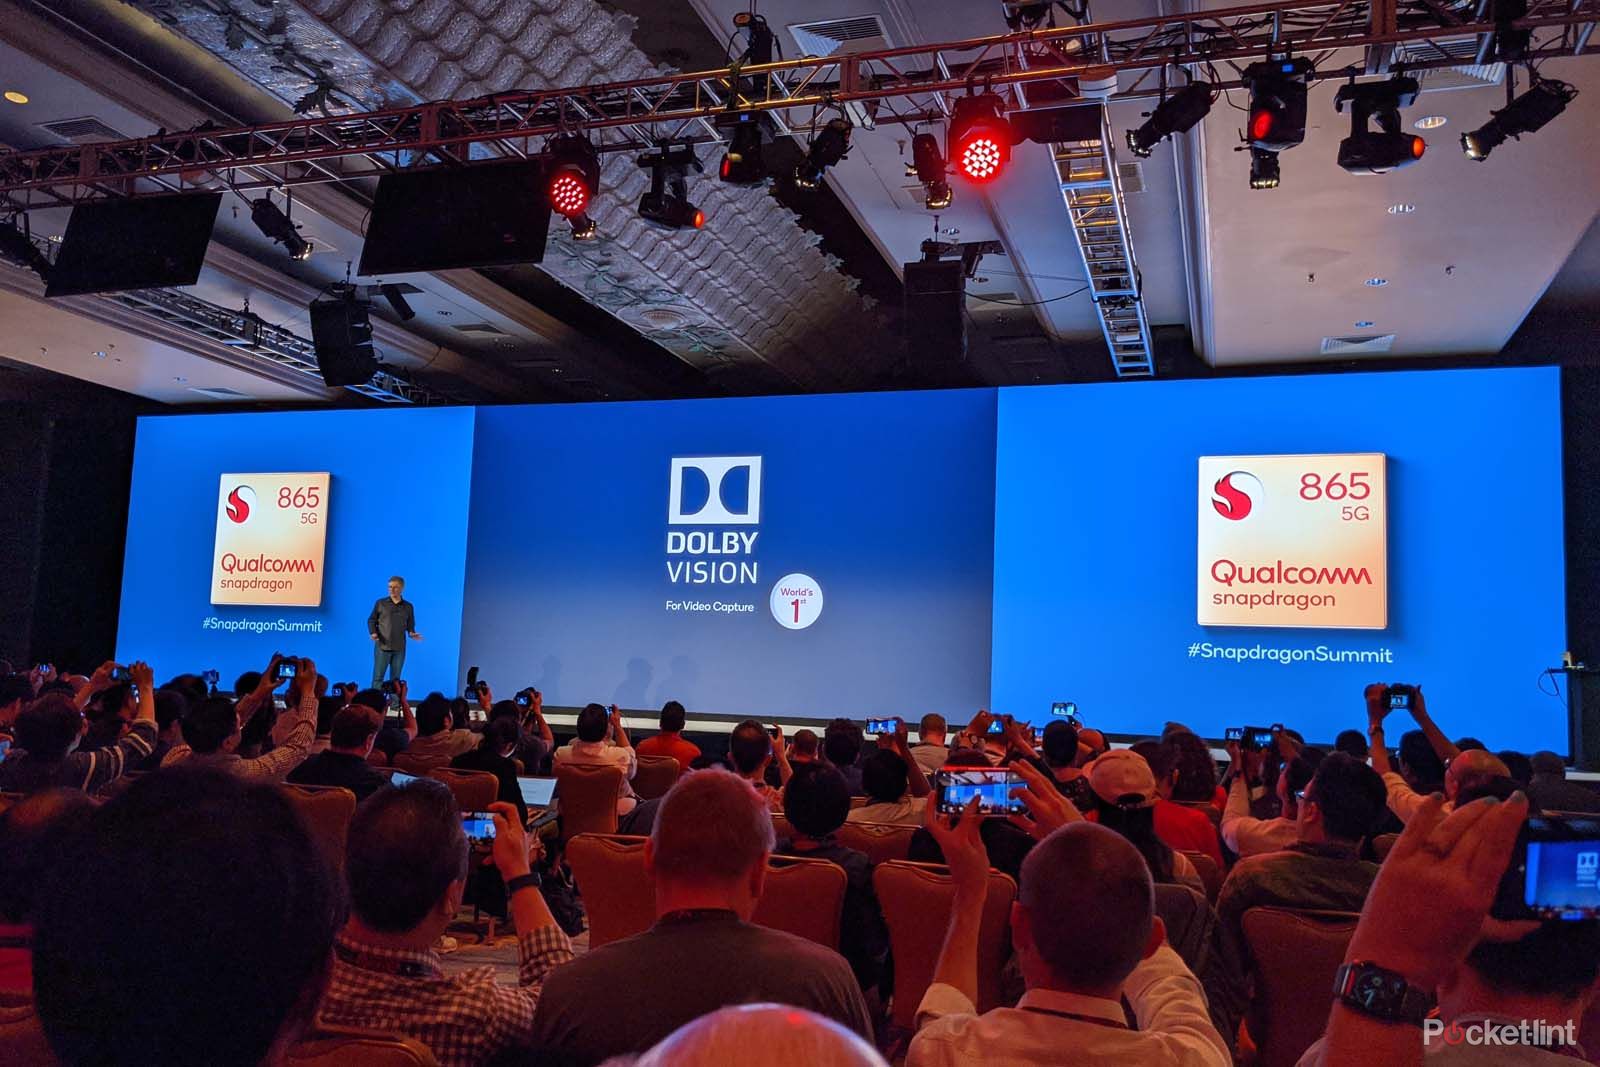 Qualcomm Snapdragon 865 supports Dolby Vision video capture on phones image 1